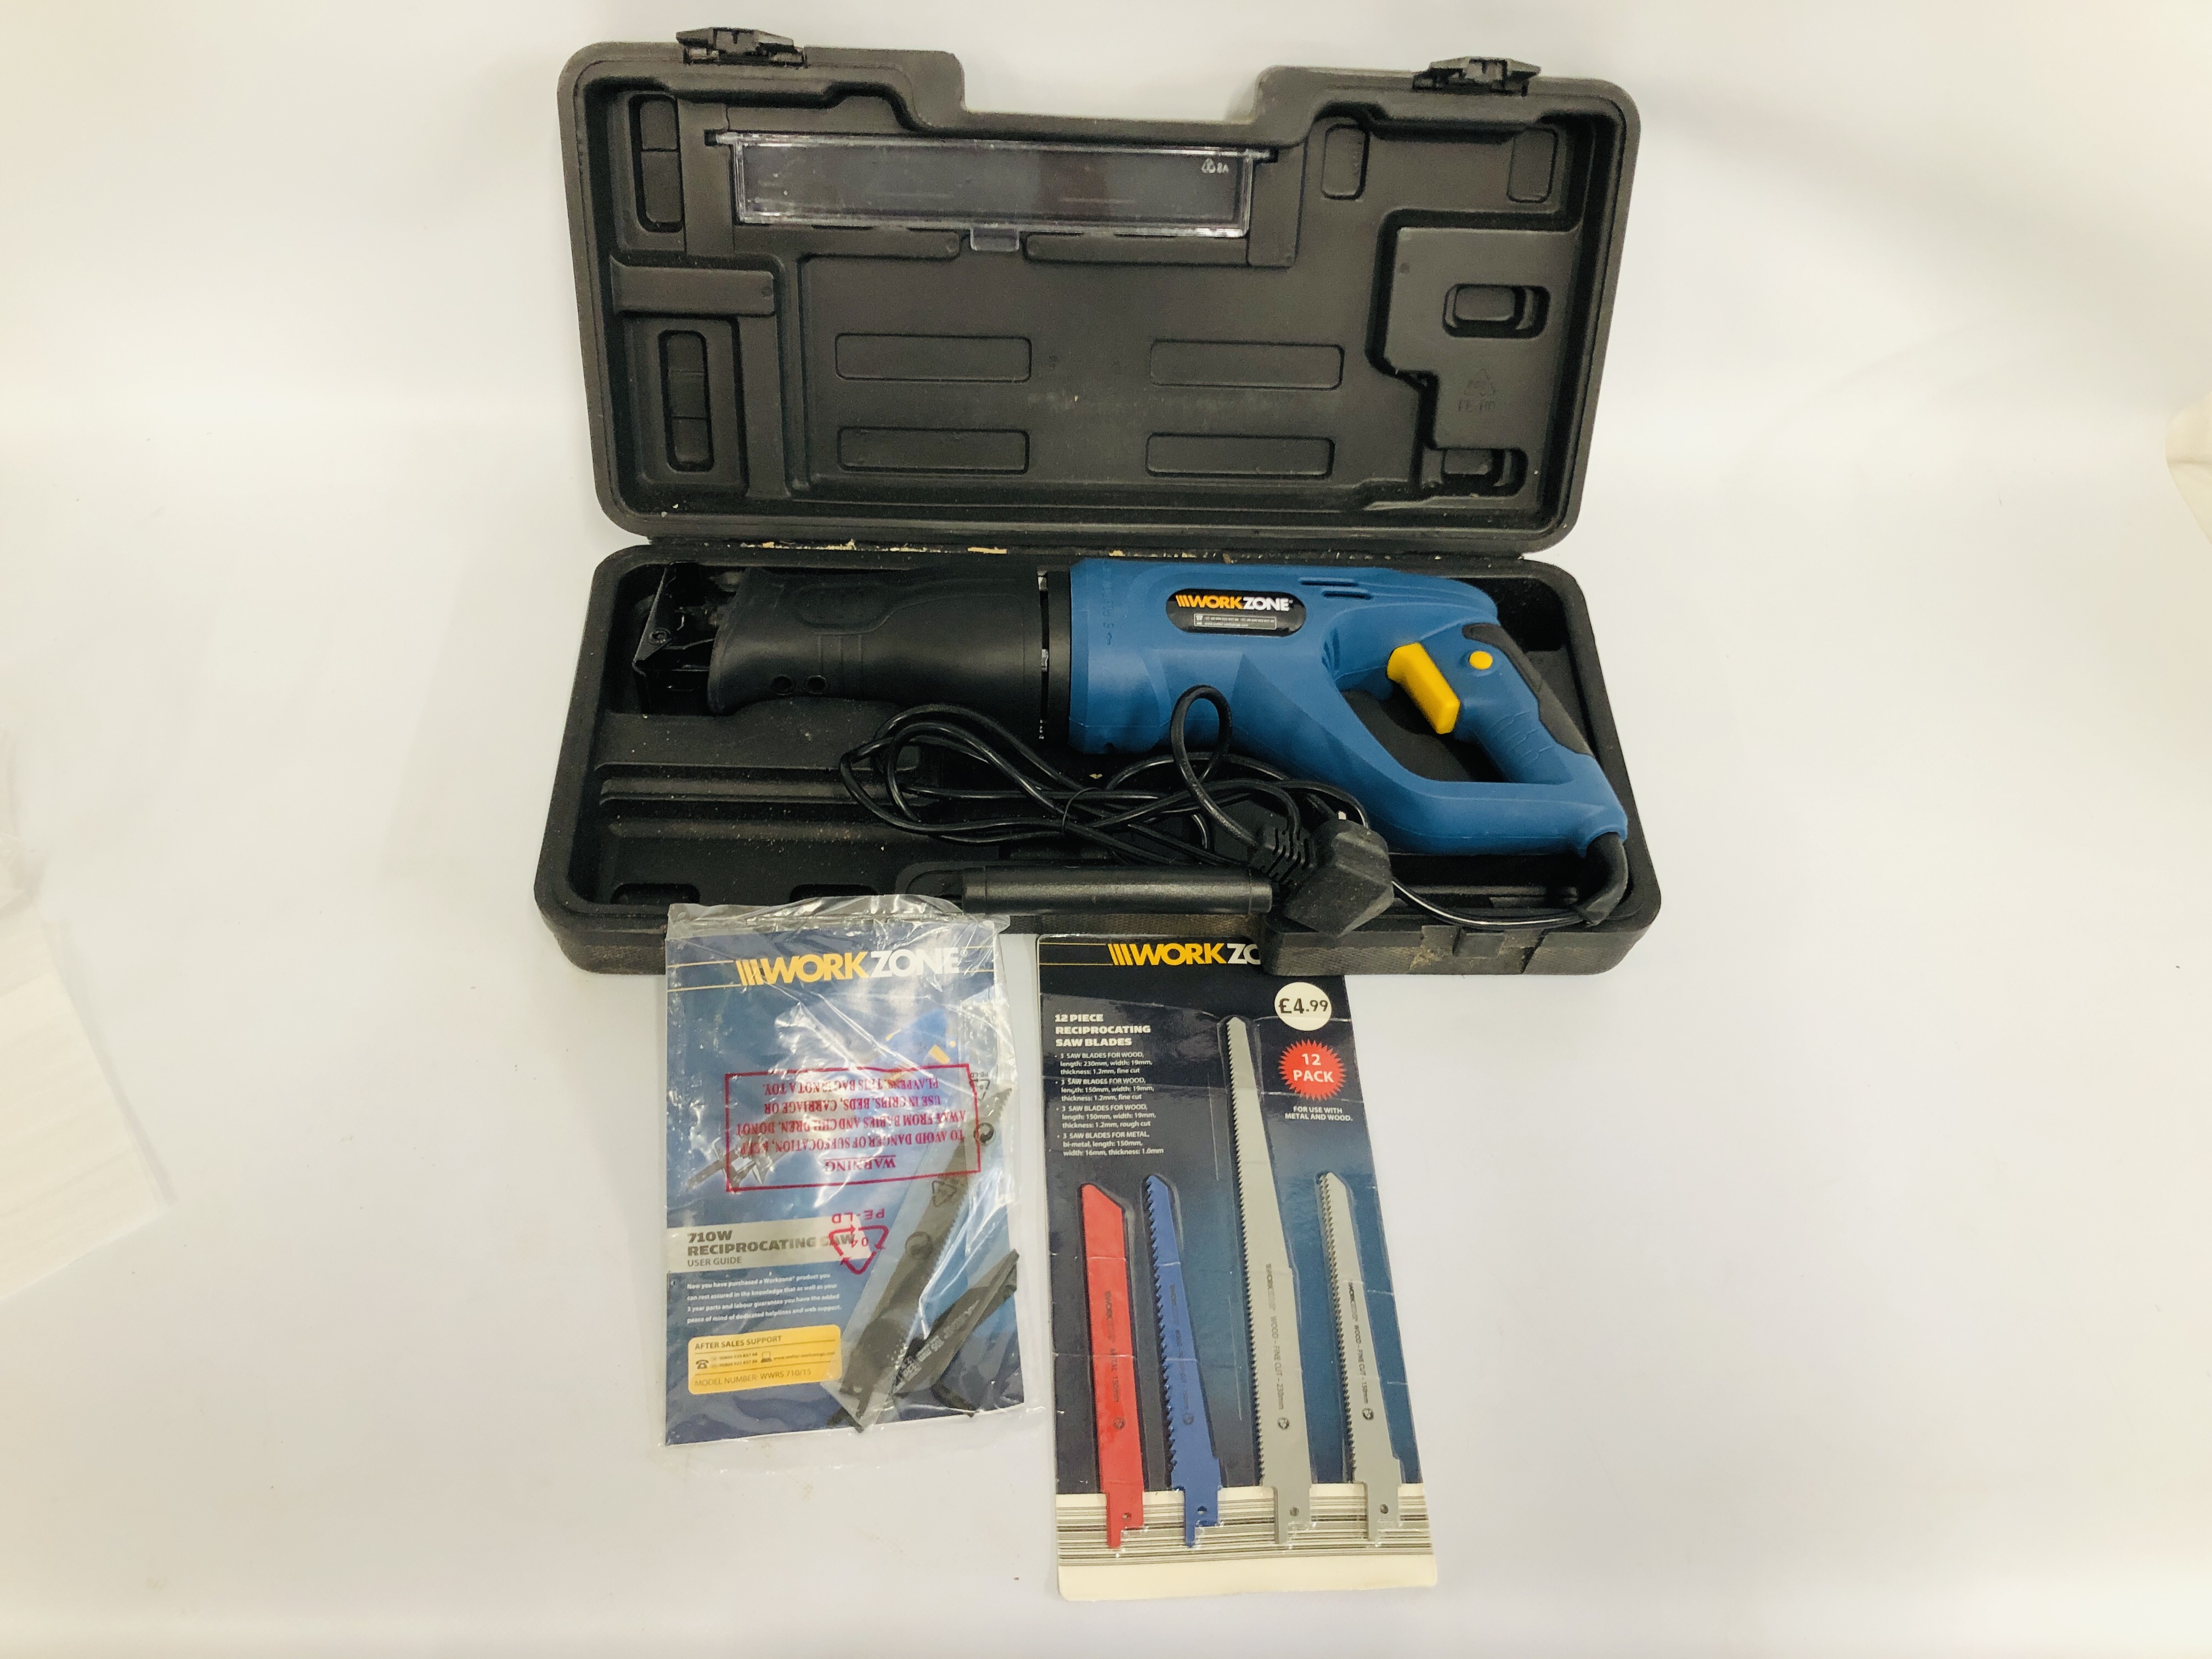 AN AS NEW WORKZONE 710 WATT RECIPROCATING SAW CASED WITH INSTRUCTIONS AND ACCESSORIES - SOLD AS - Image 2 of 6